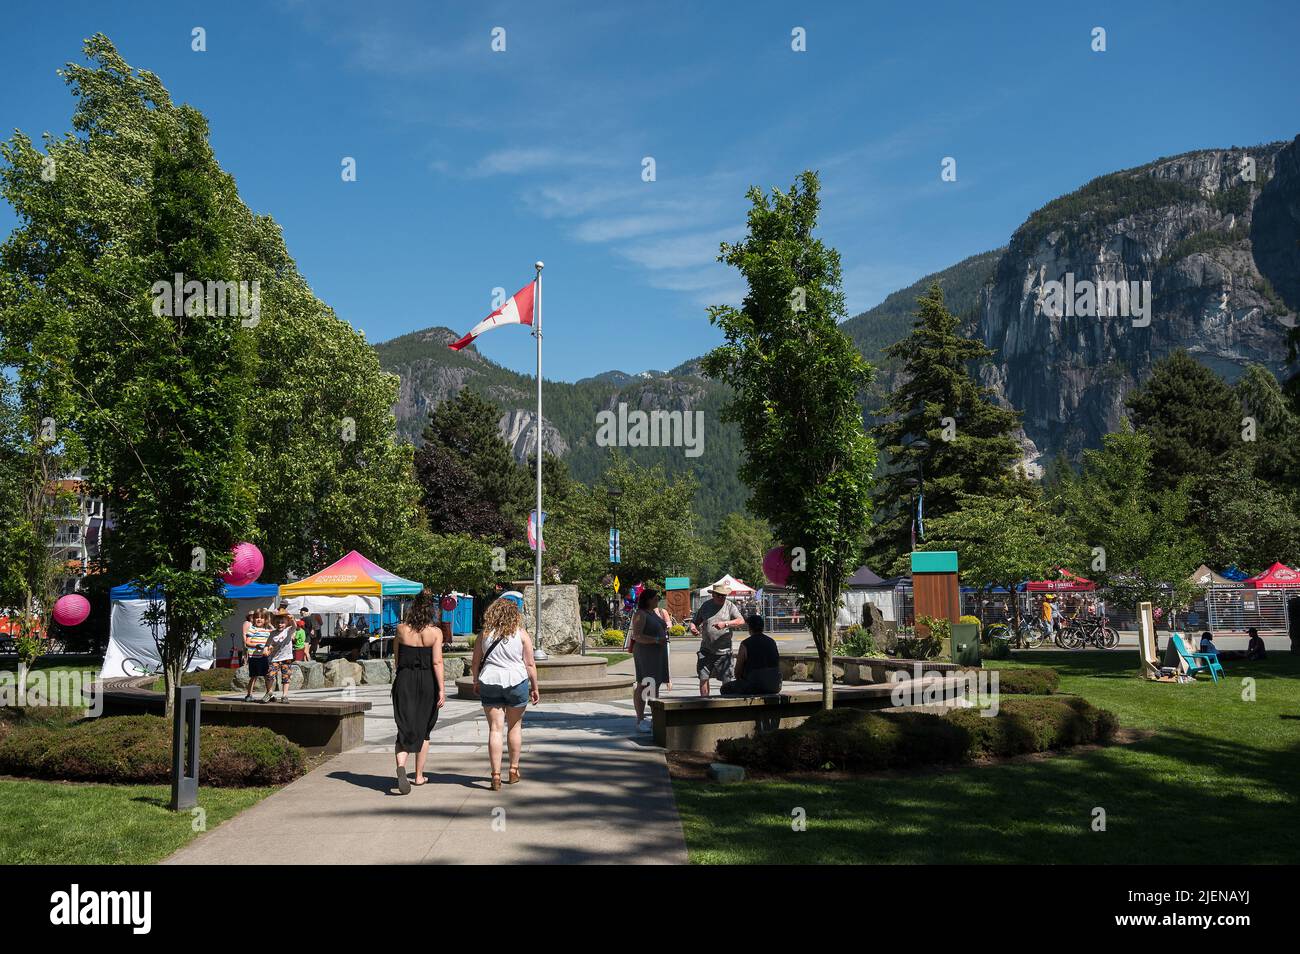 Downtown Squamish BC with the Stawamus Chief mountain the background. Stock Photo